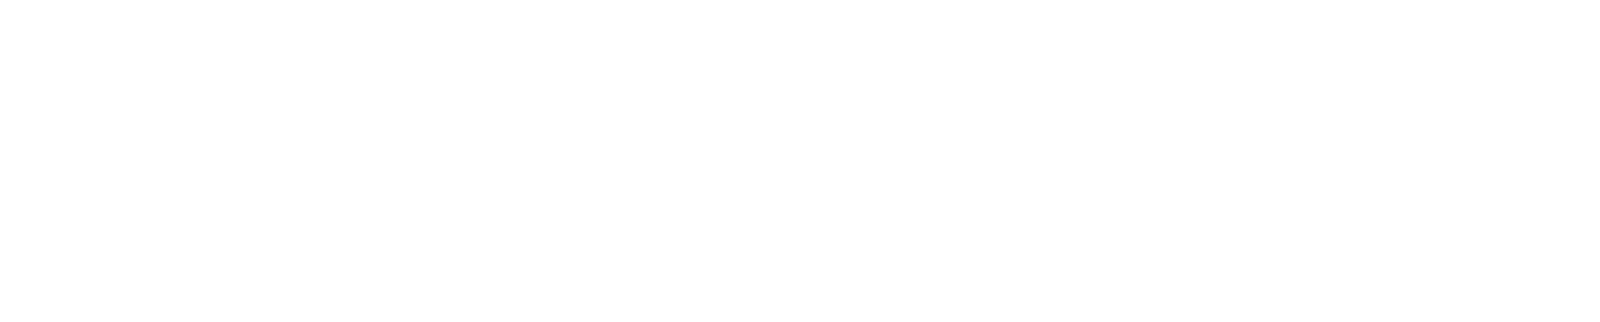 Winter Horror by Image Comics